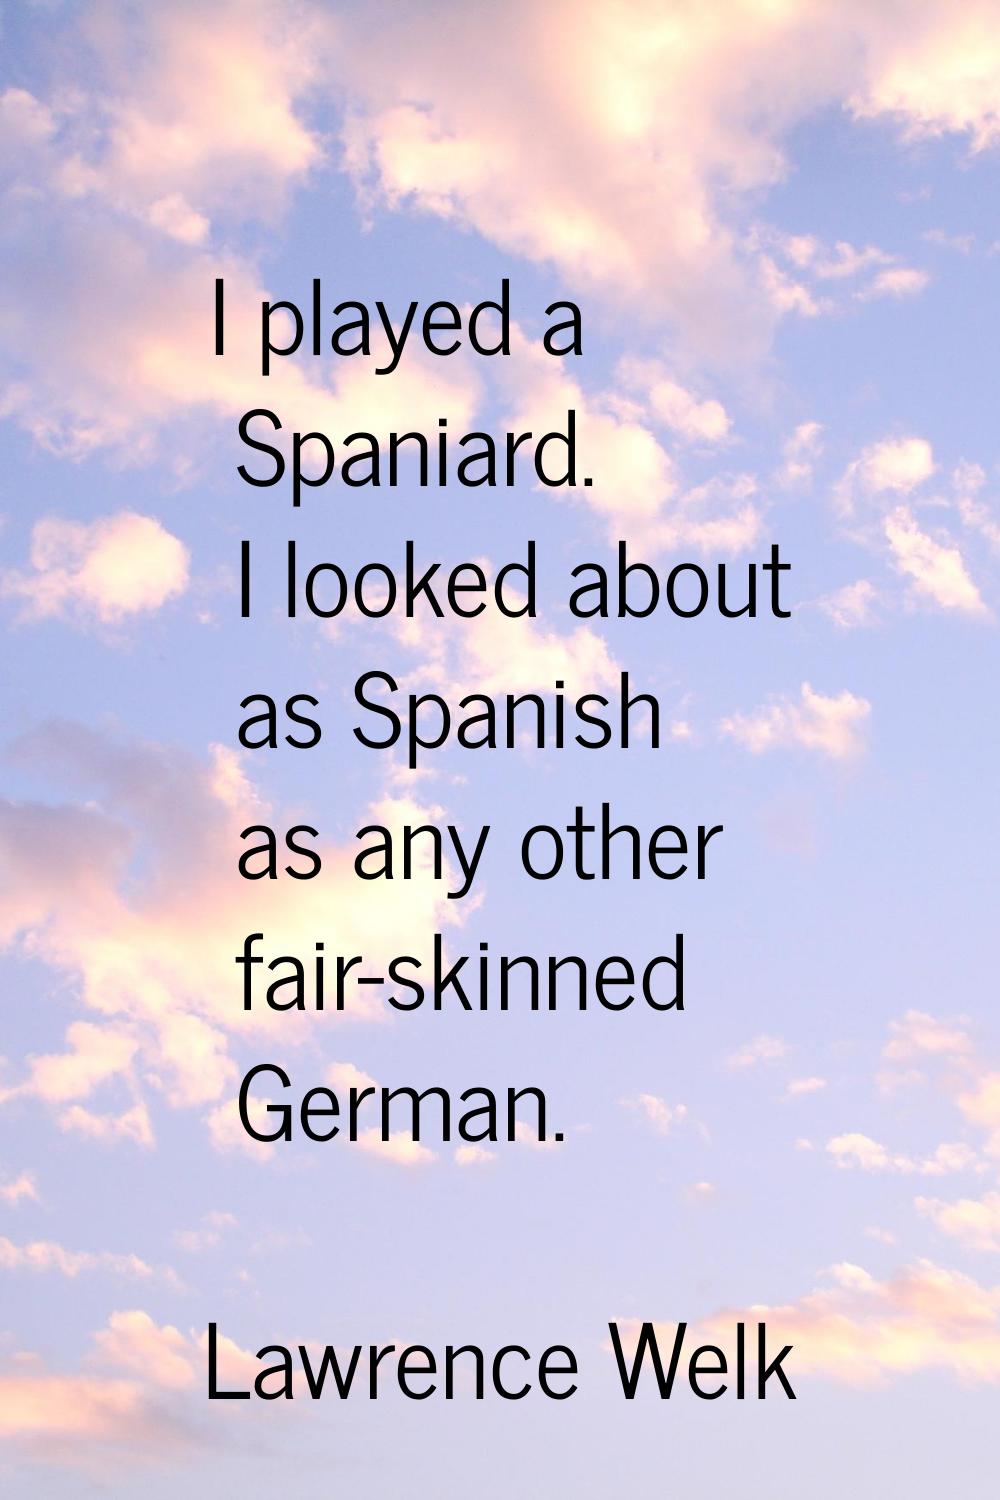 I played a Spaniard. I looked about as Spanish as any other fair-skinned German.